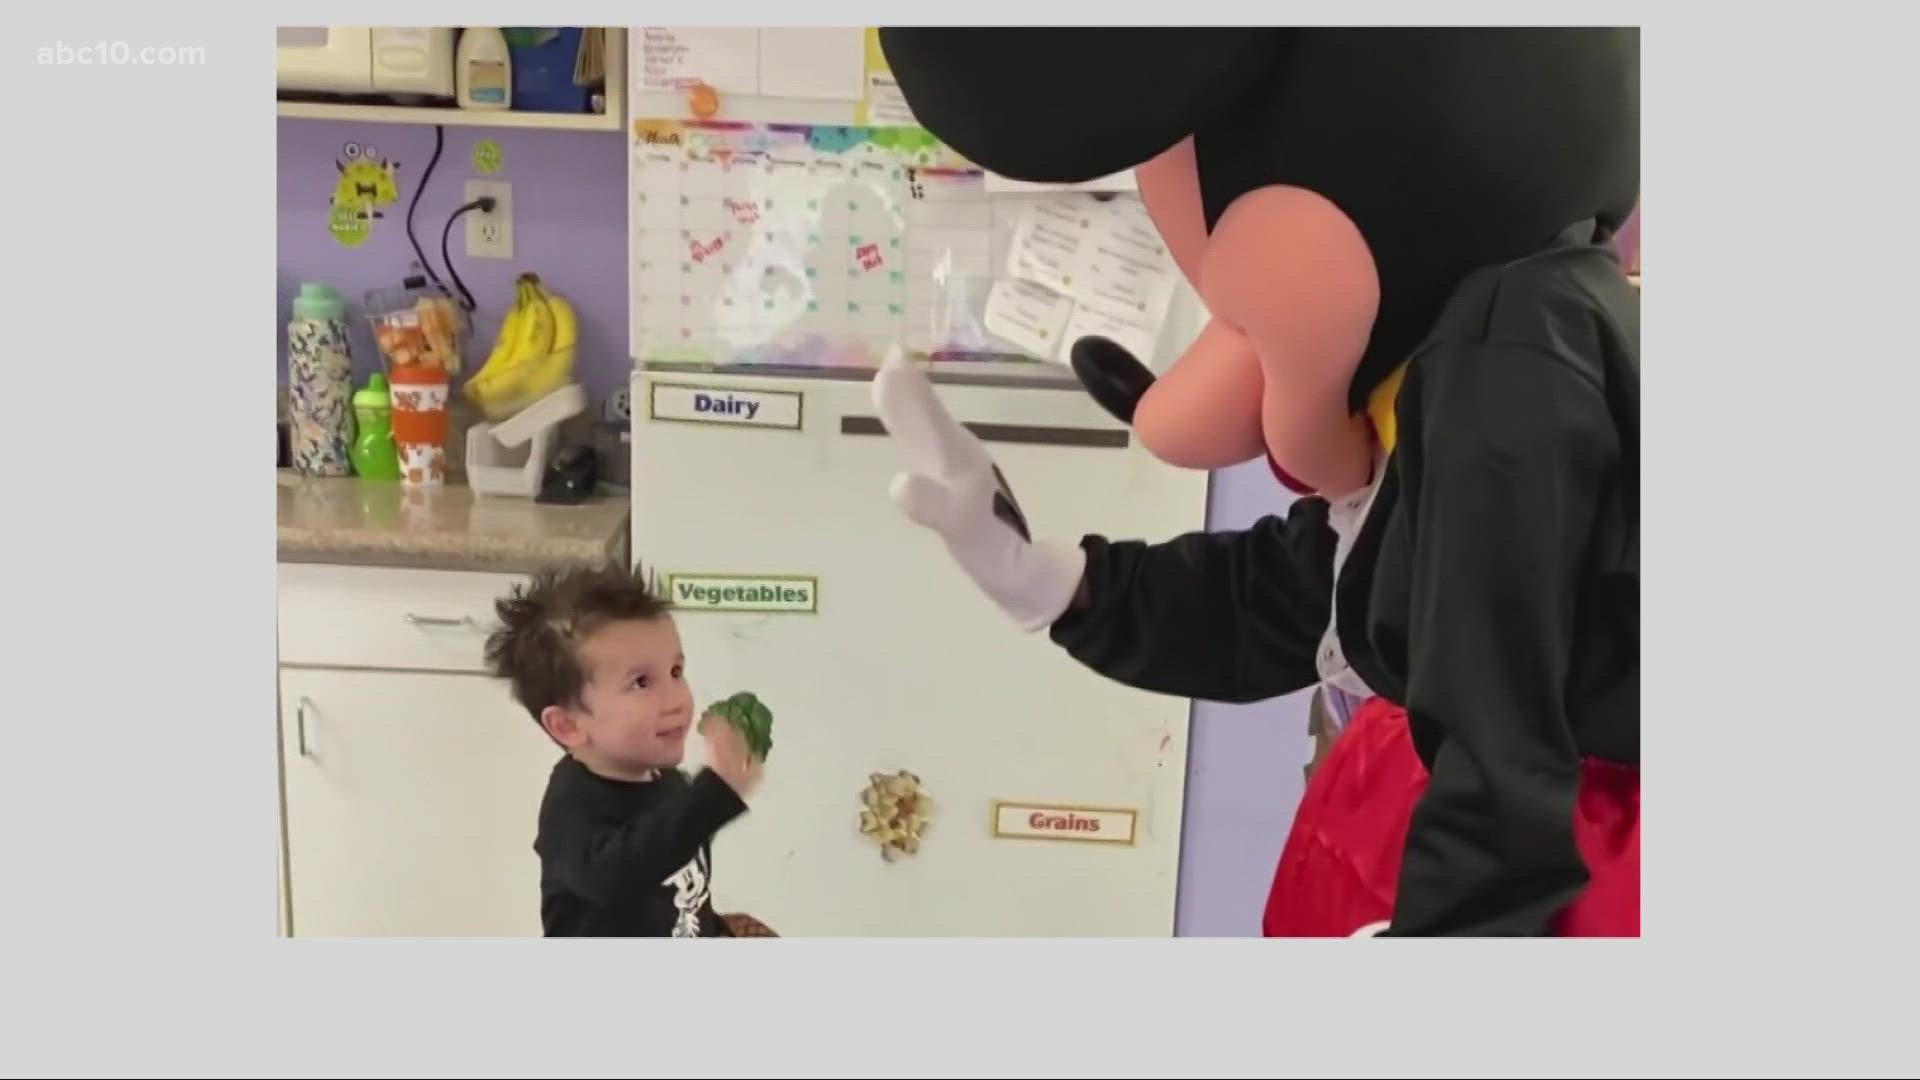 Nico Flores was recently diagnosed with Autism and is nonverbal. A silent birthday celebration with Mickey Mouse was just perfect for him.